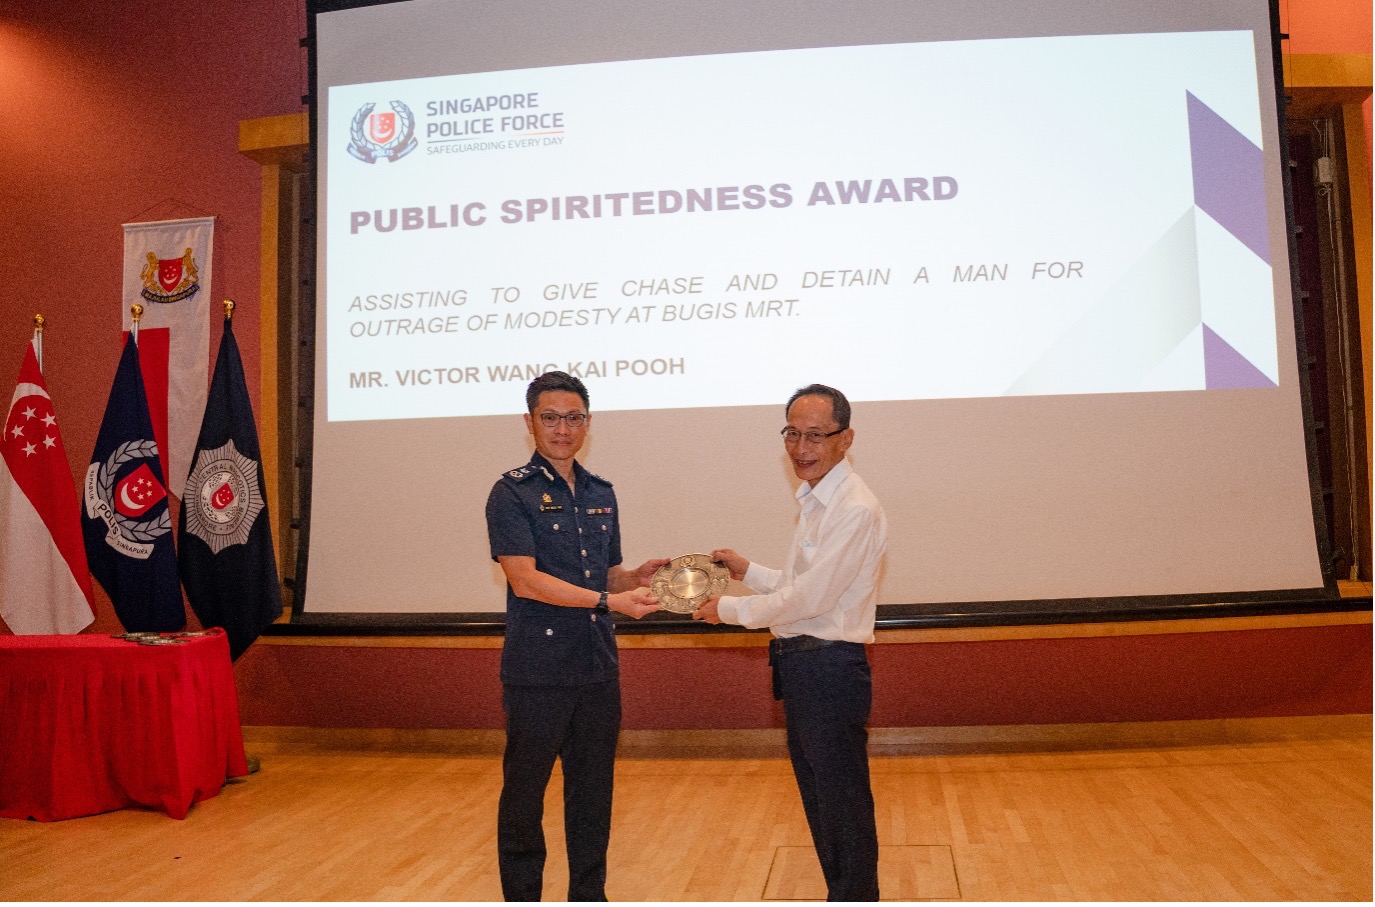 20220818_eleven_members_of_the_public_presented_with_public_spiritedness_award2